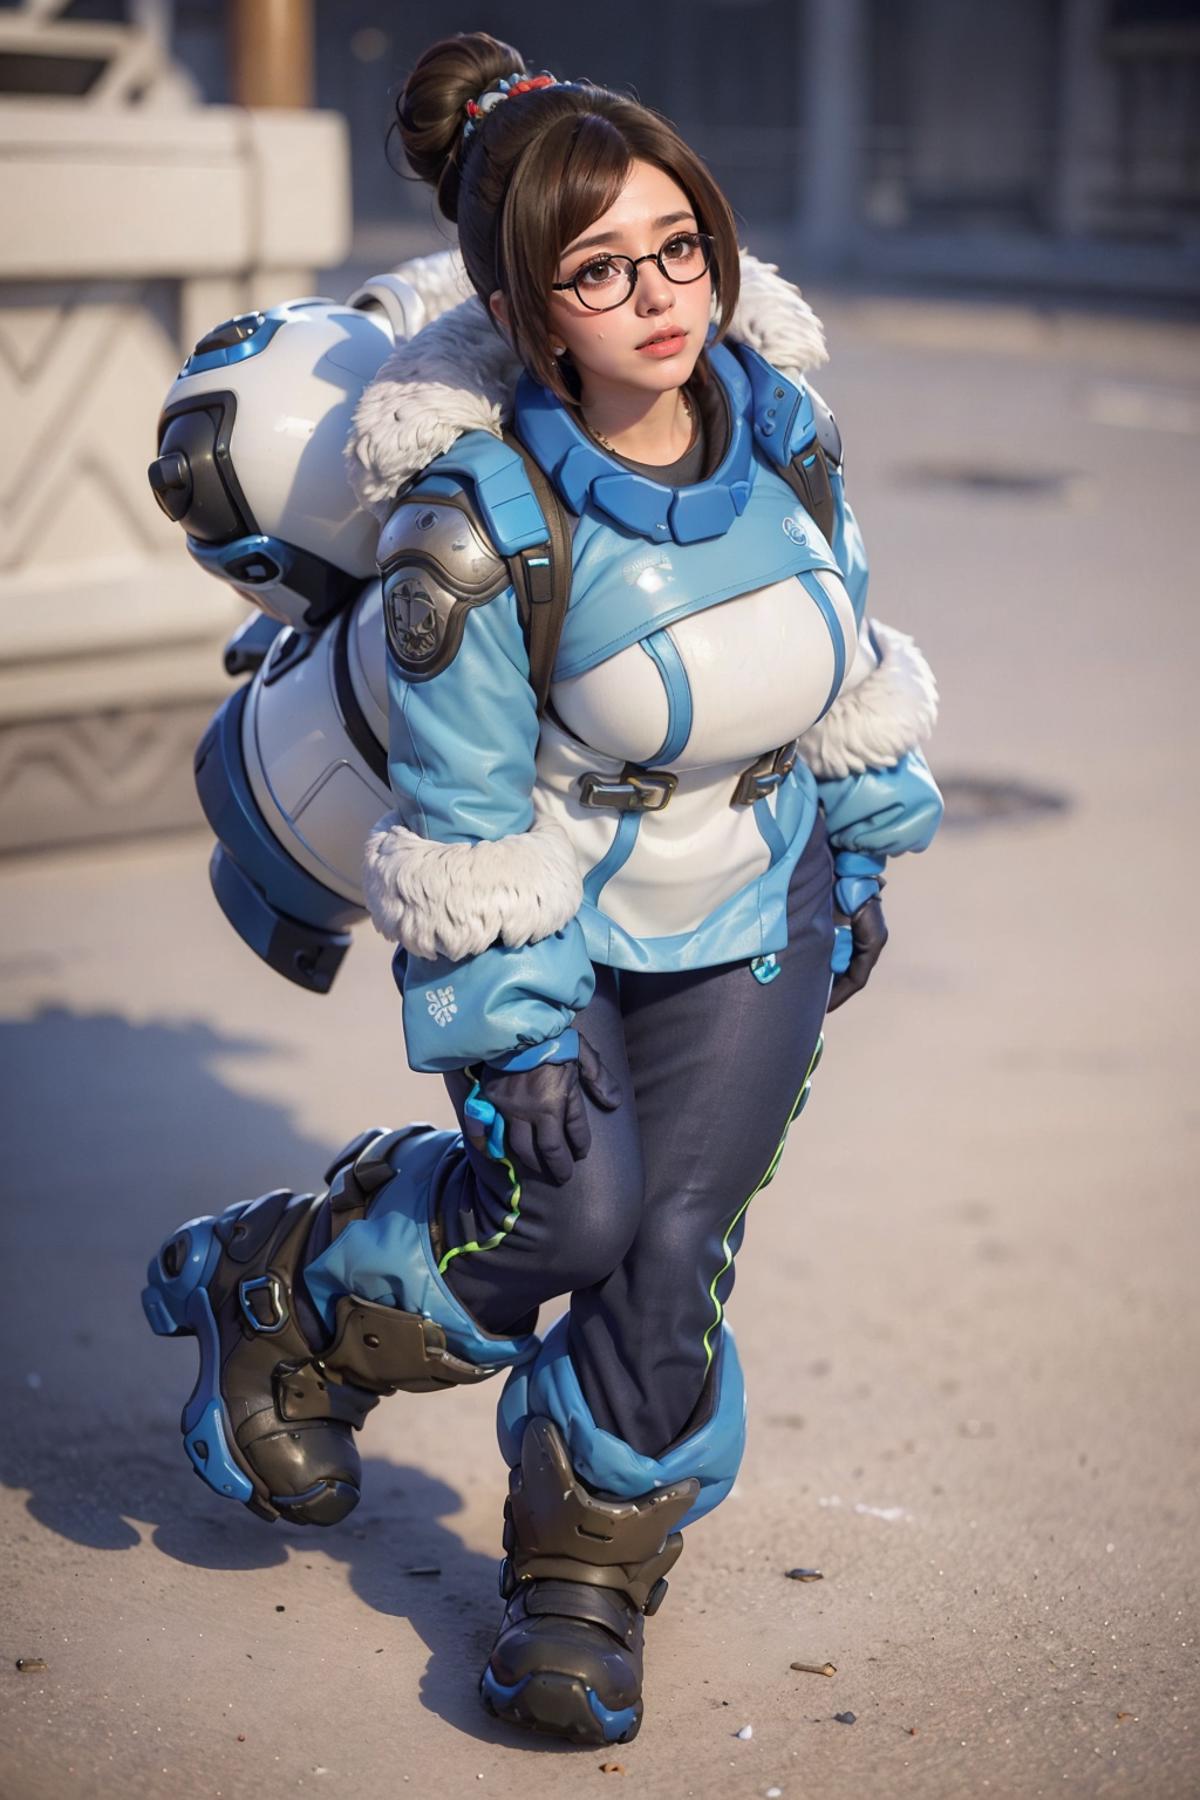 Mei from Overwatch image by Darknoice